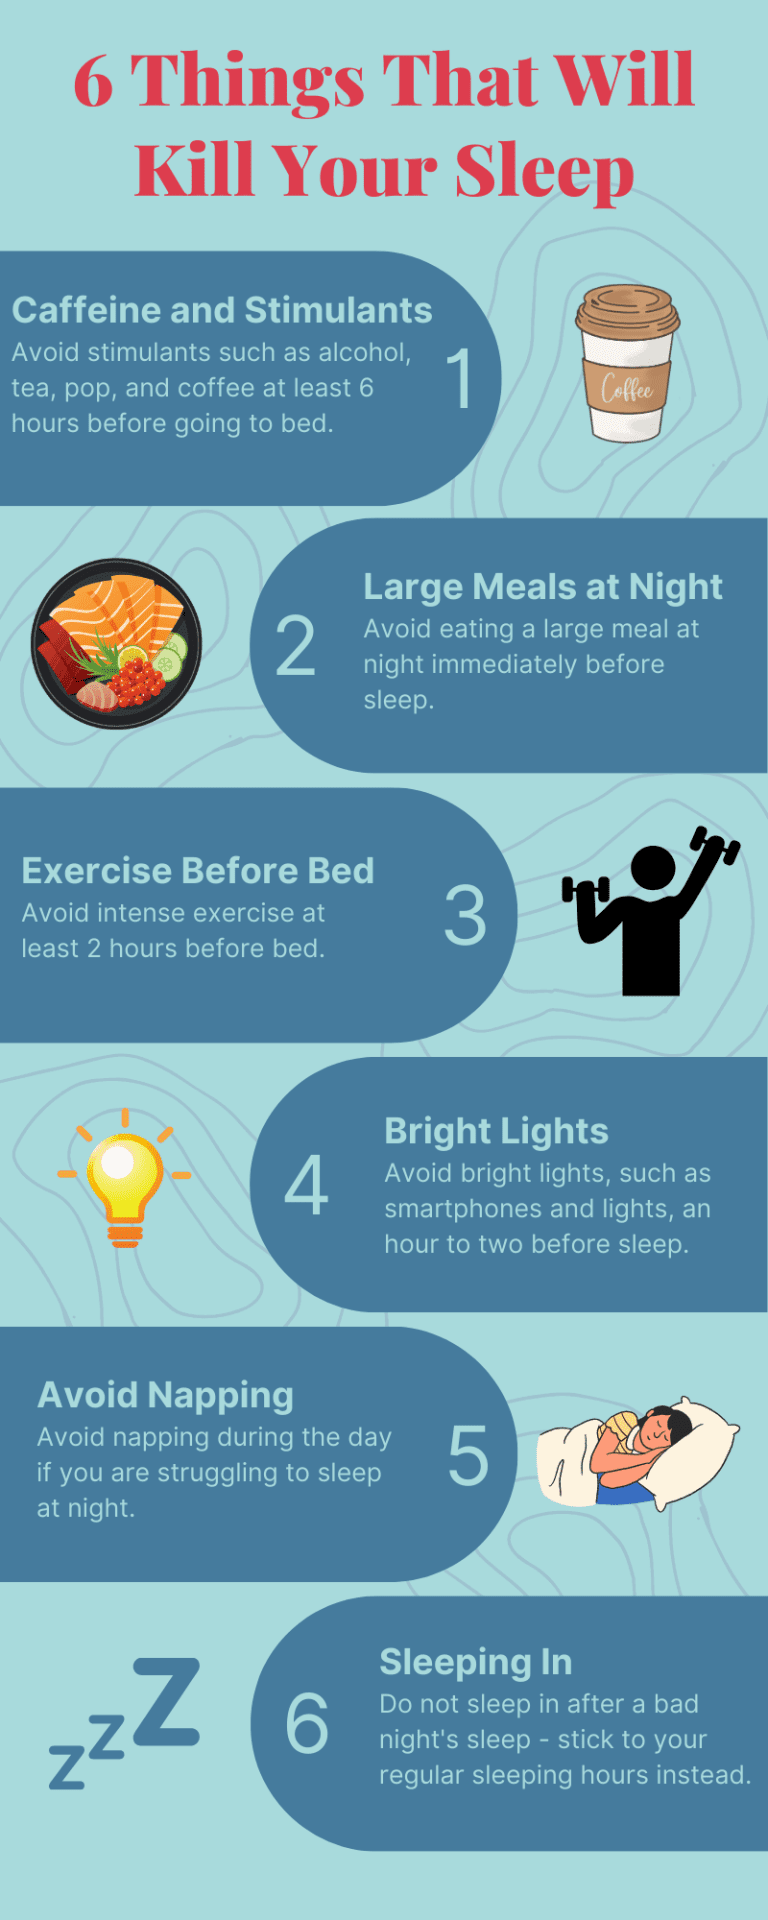 6 Things that will kill your sleep